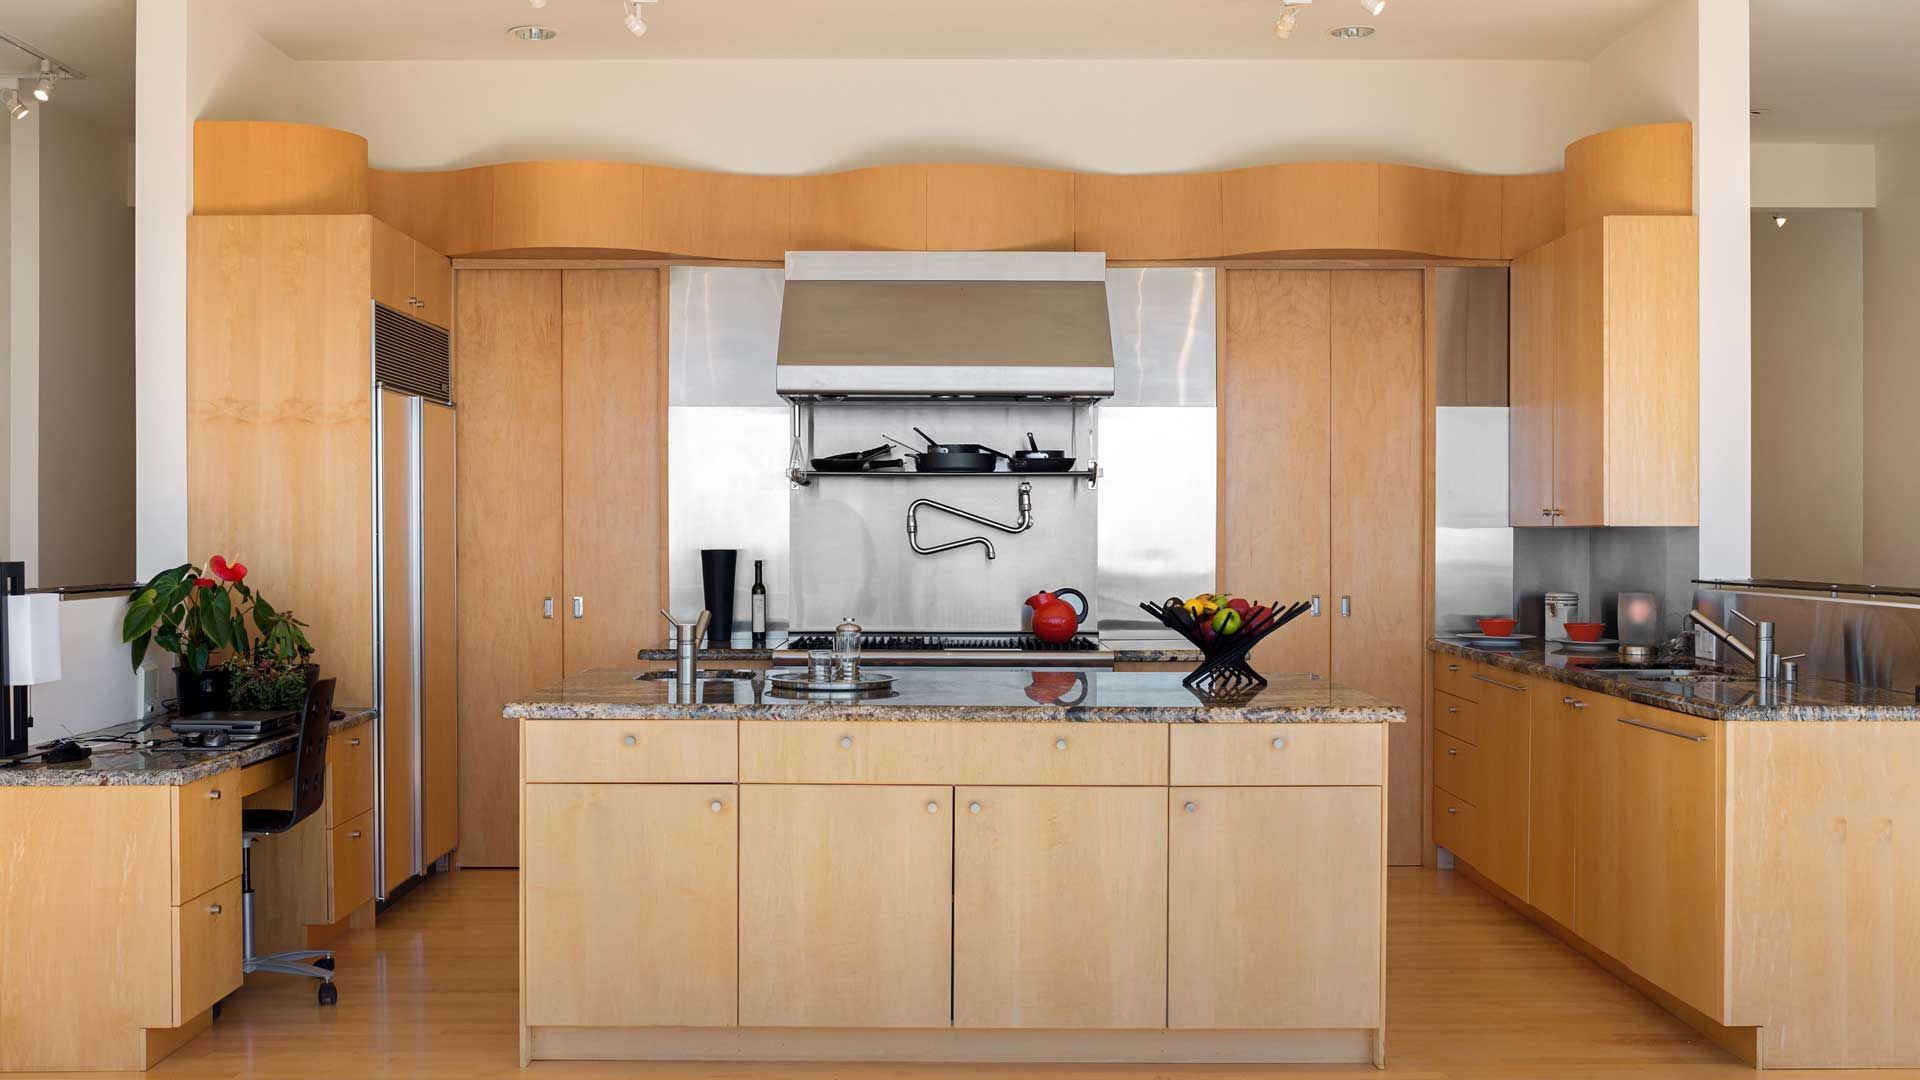 Interior with countertop and cabinetry